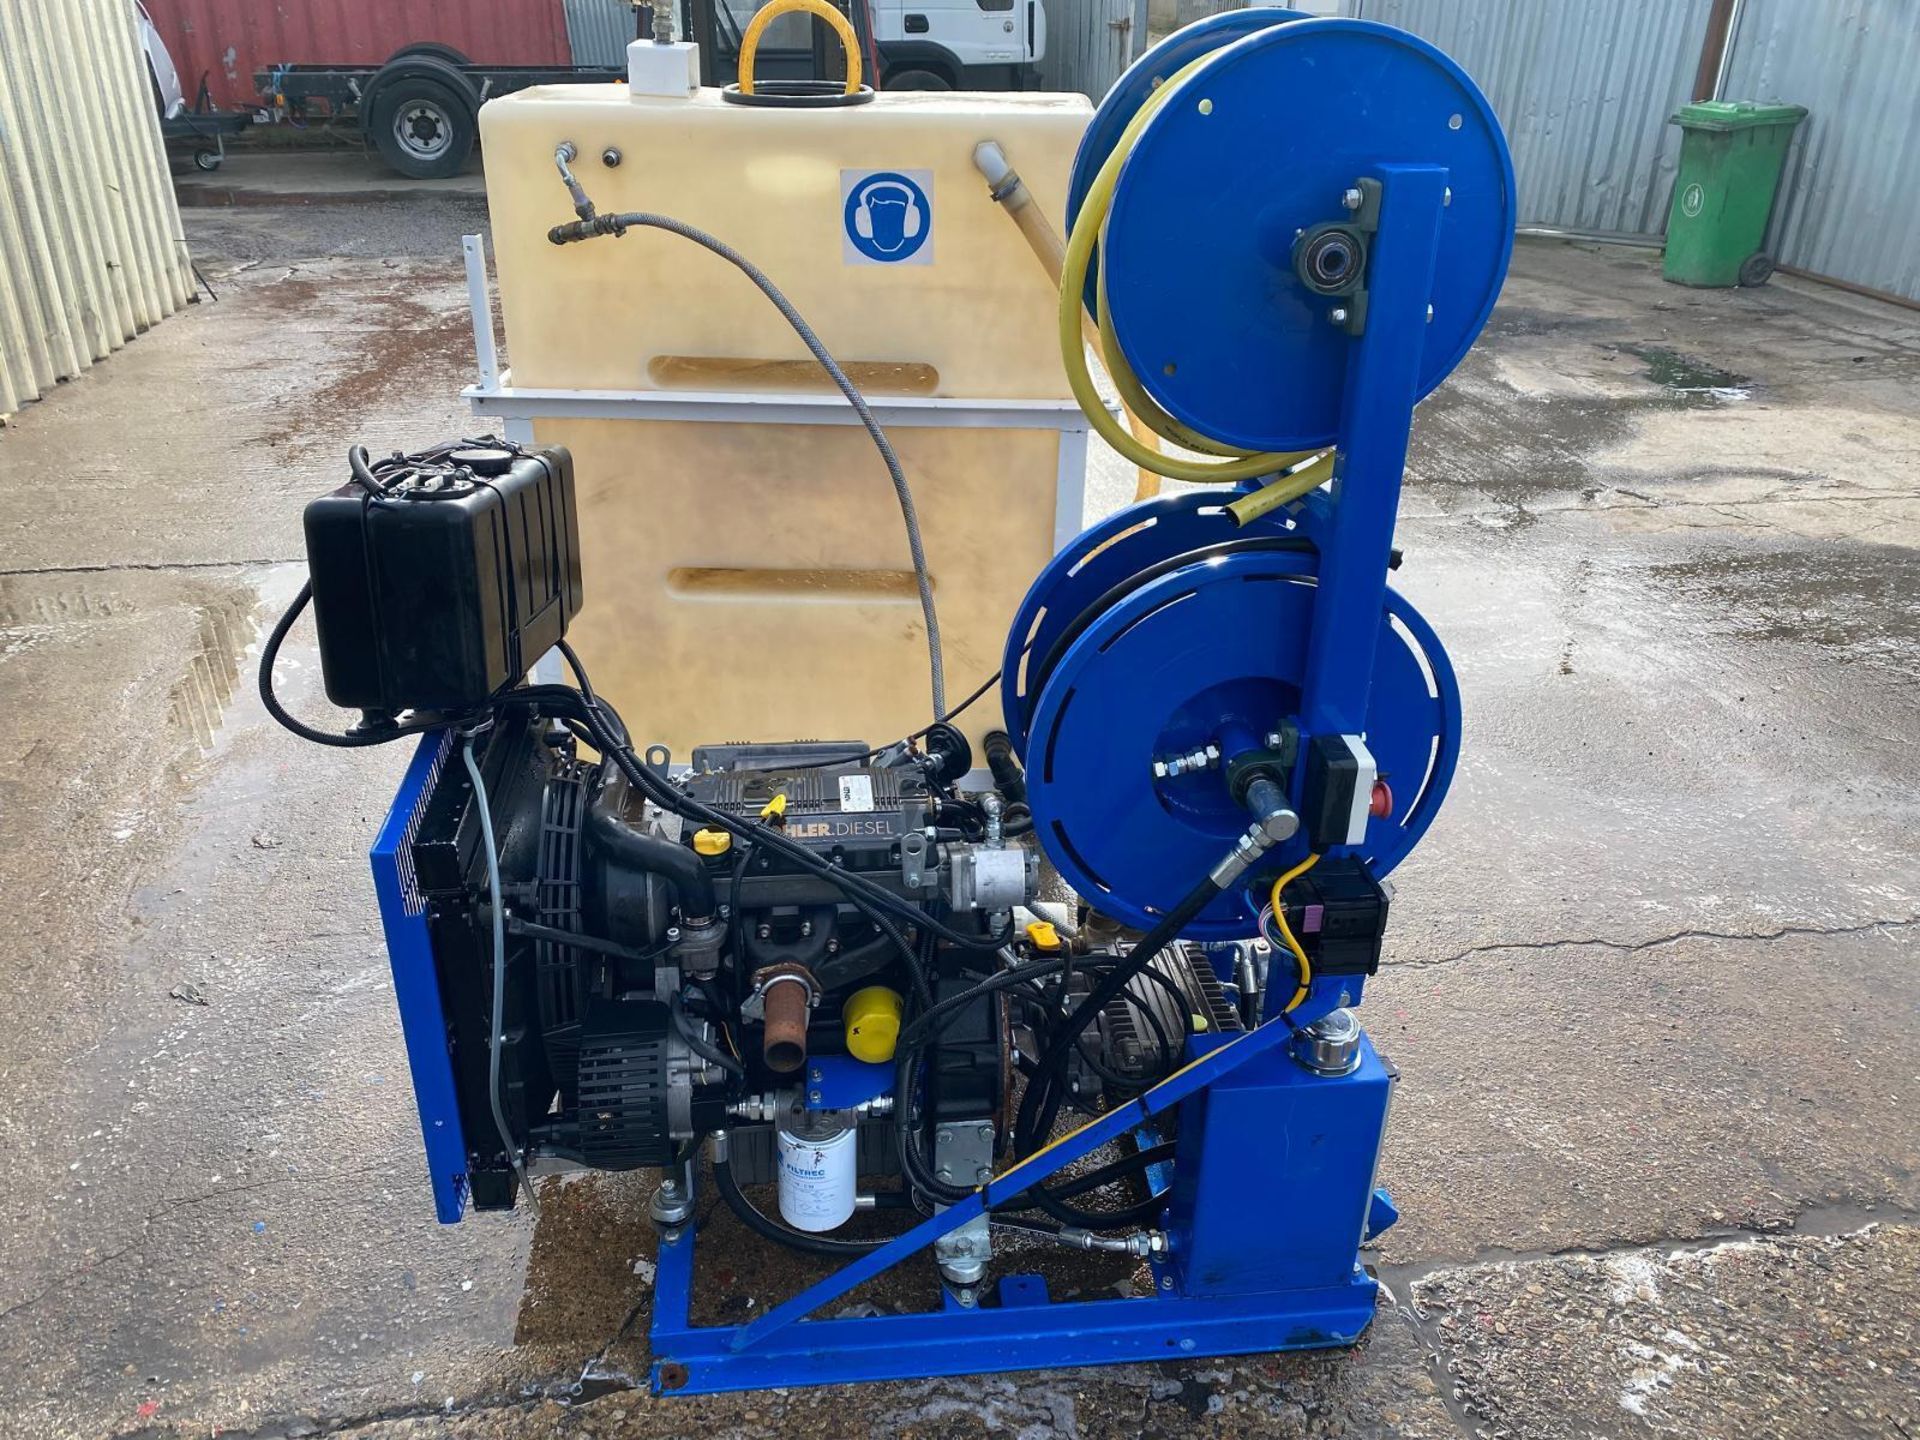 RIONED & ANDY GUEST KOHLER DIESEL HIGH-PRESSURE JETTER WITH WATER TANK (NO VAT ON HAMMER) - Image 9 of 9